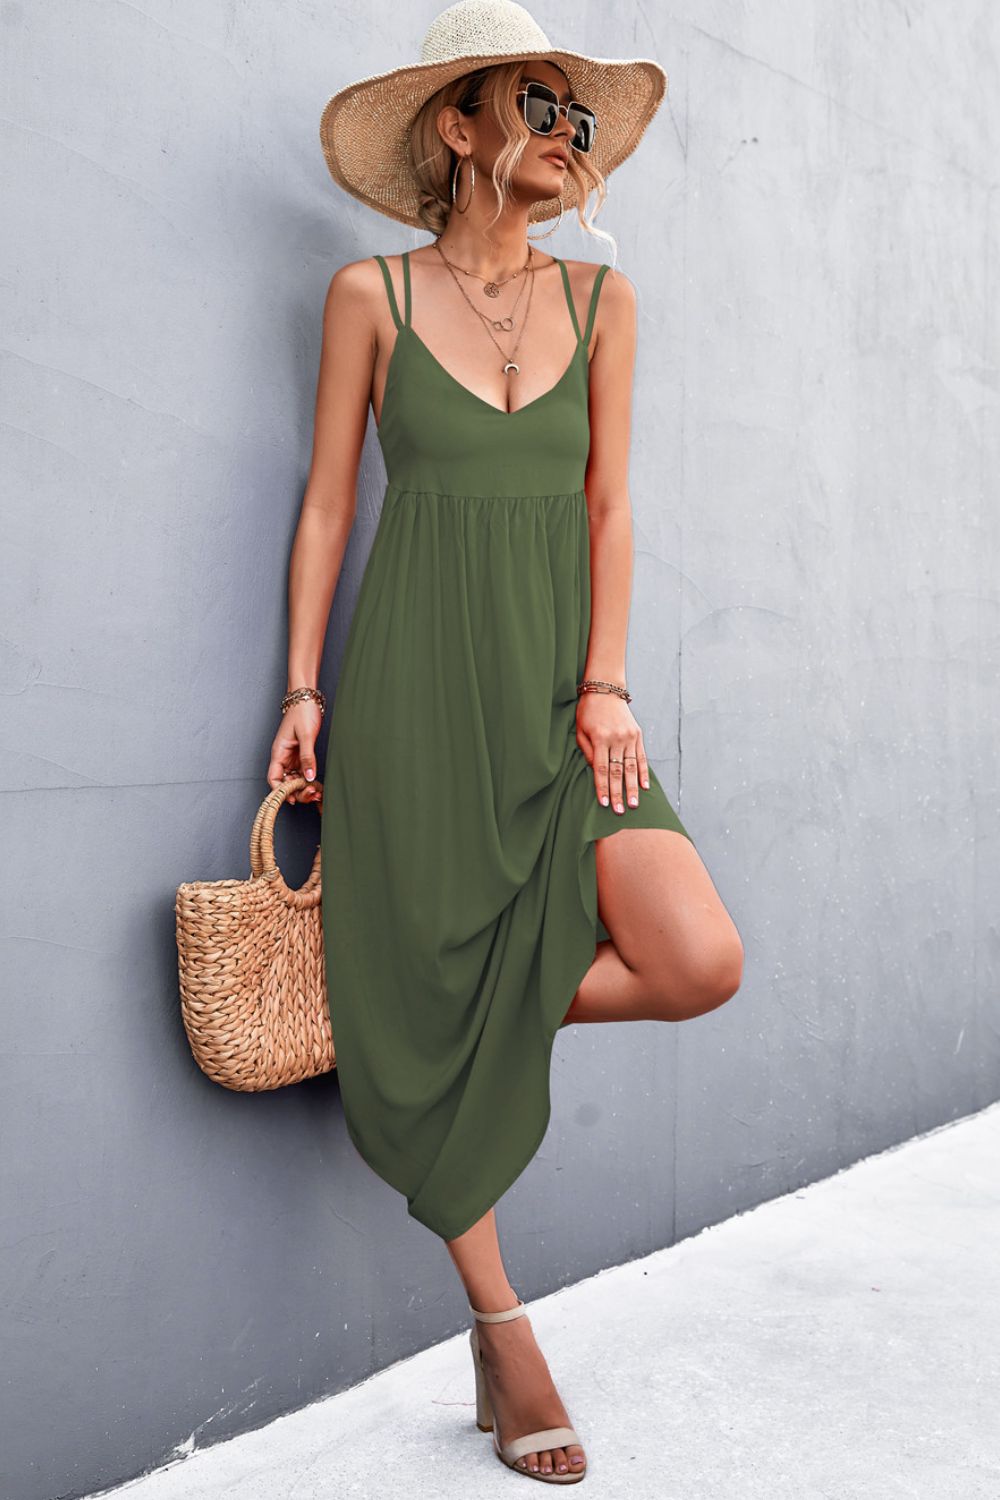 Double Strap Tie Back Dress - Online Only